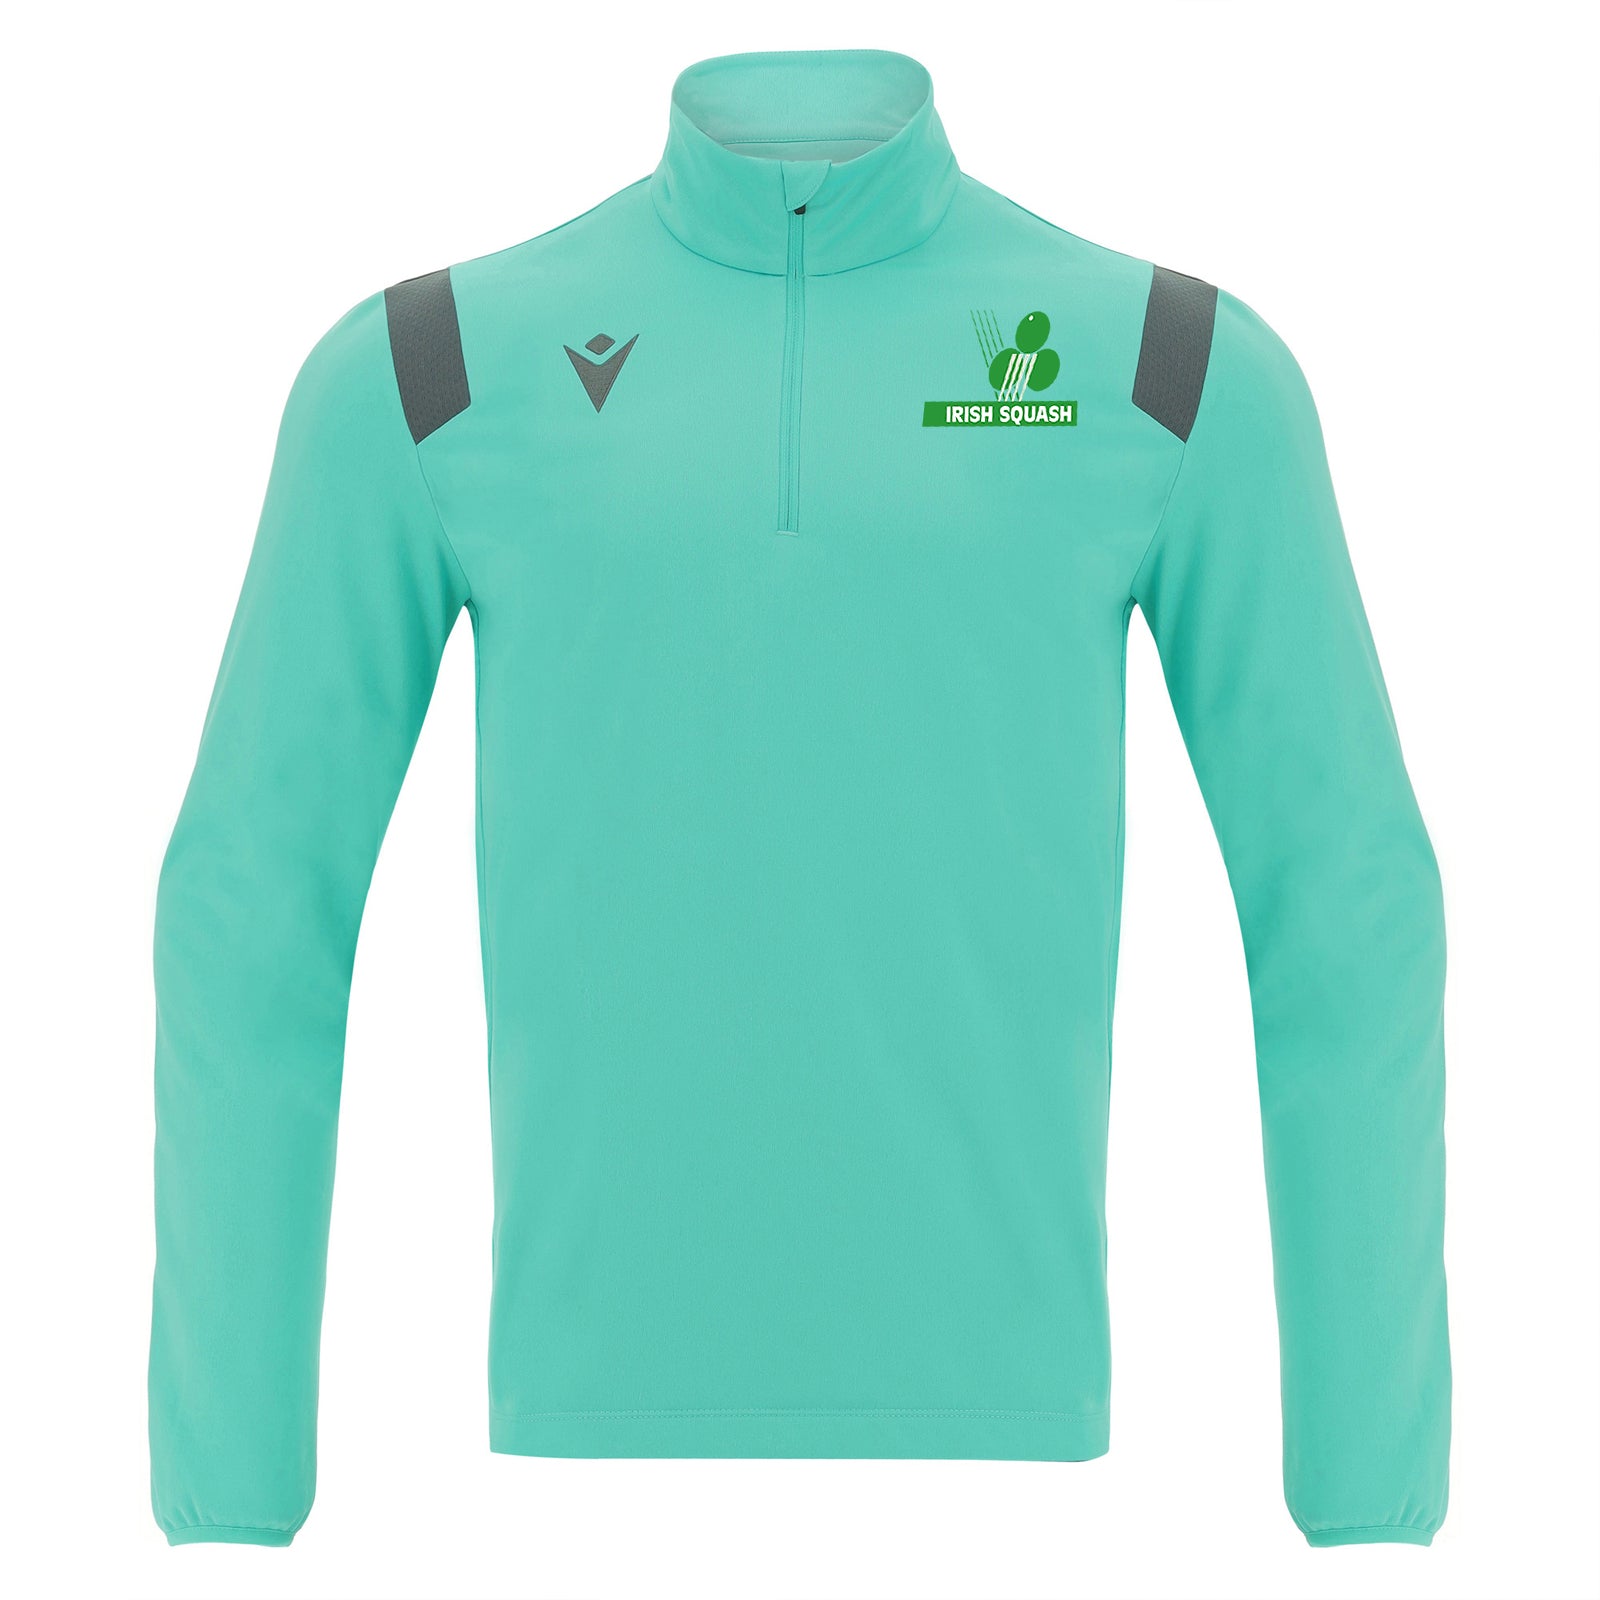 Photo of the Irish Squash 'Gange' 1/4 Zip Tracksuit Top in Turquoise, front-view